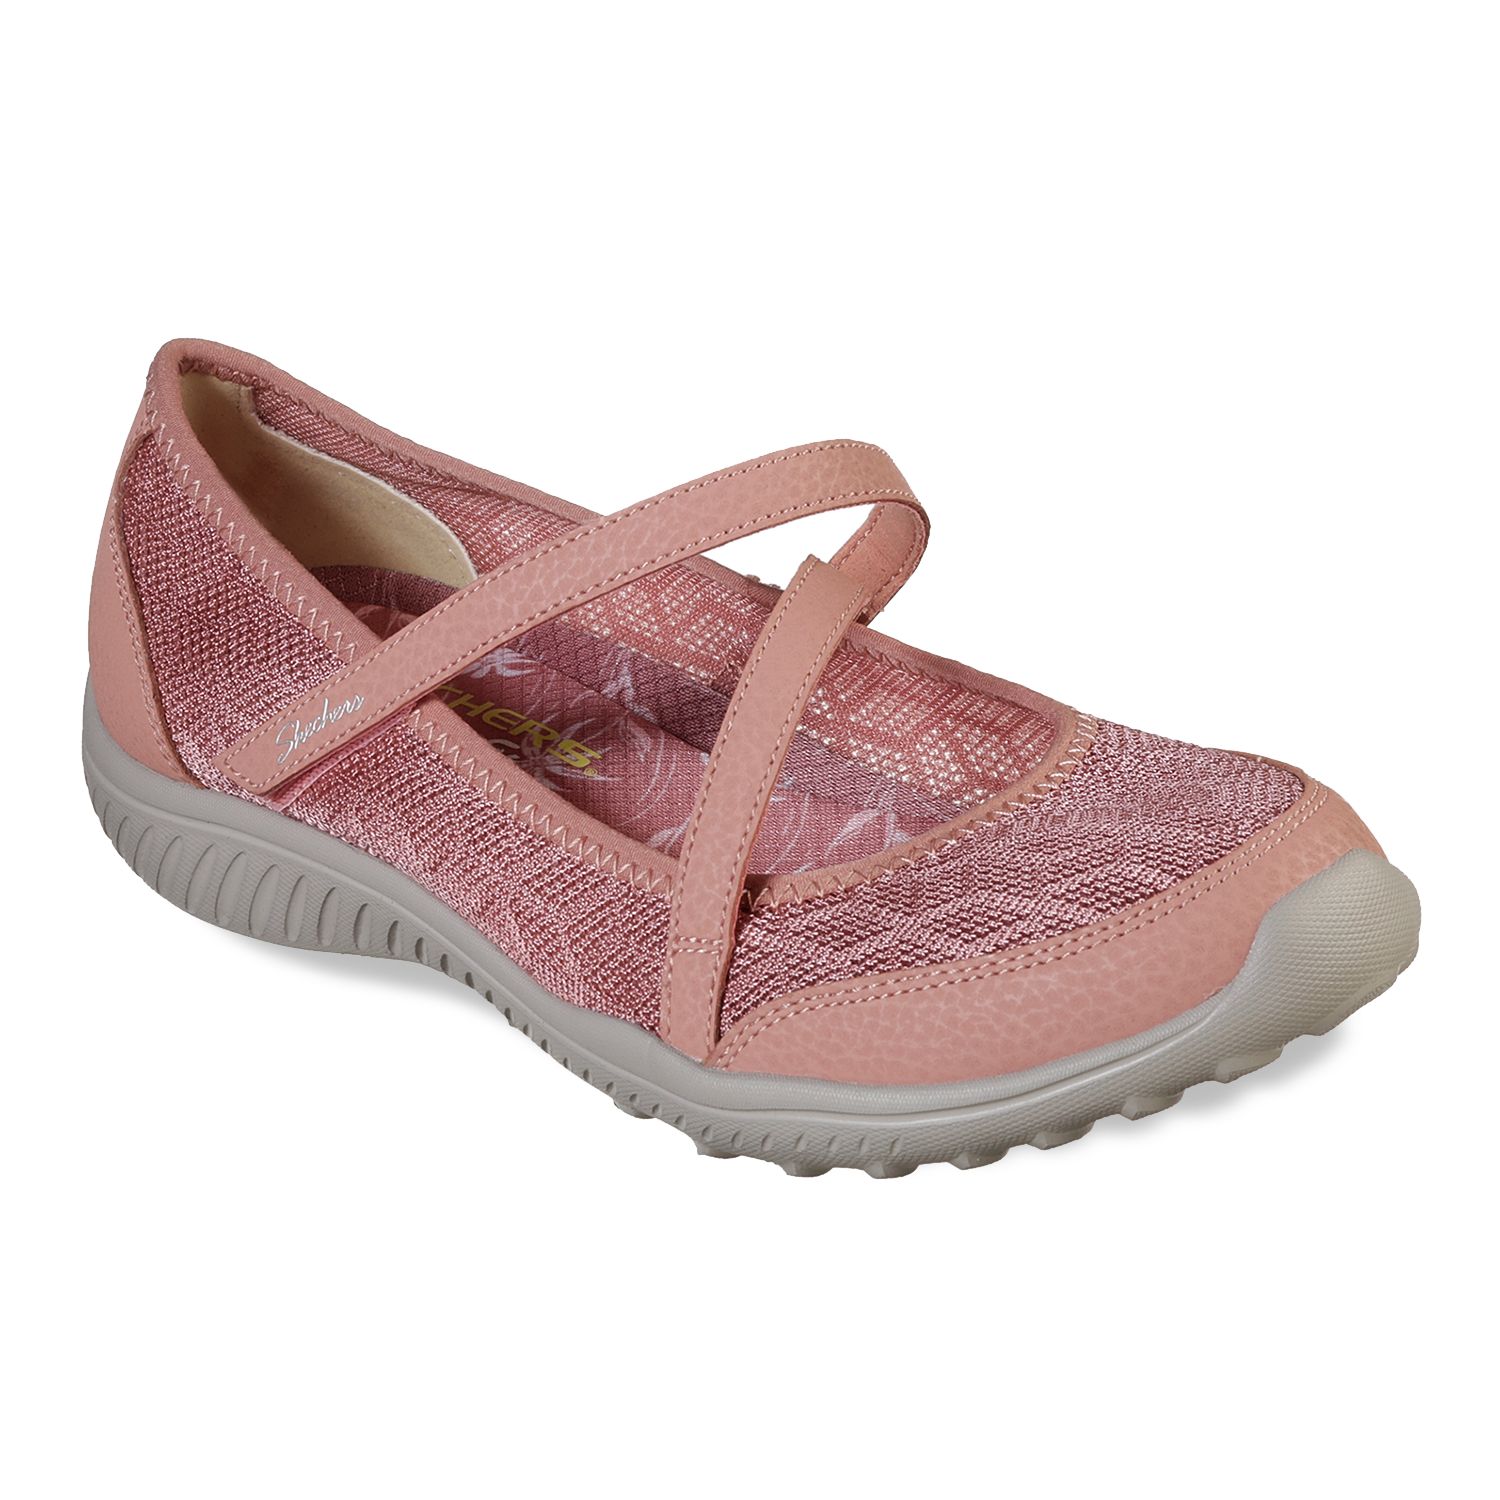 skechers mary jane style shoes